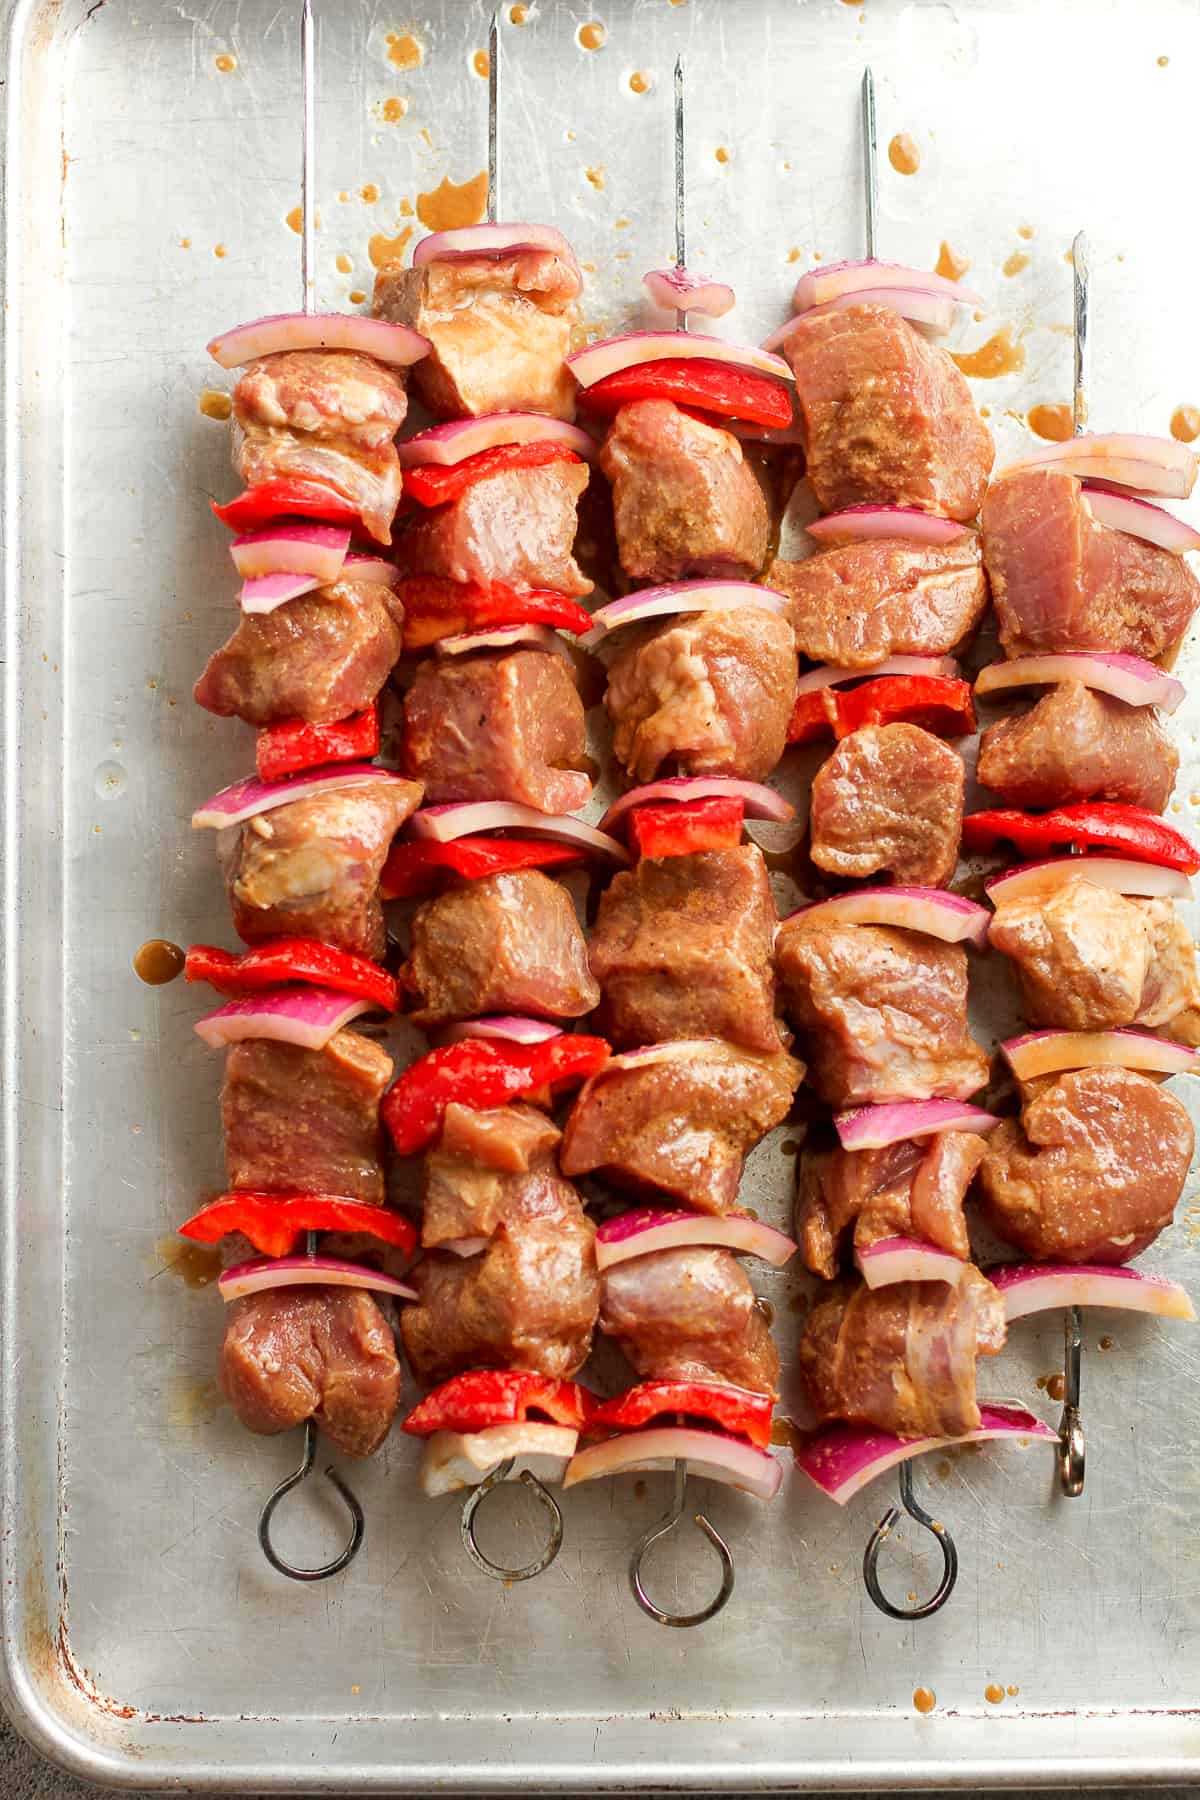 The raw kabobs before grilling on a sheet pan.